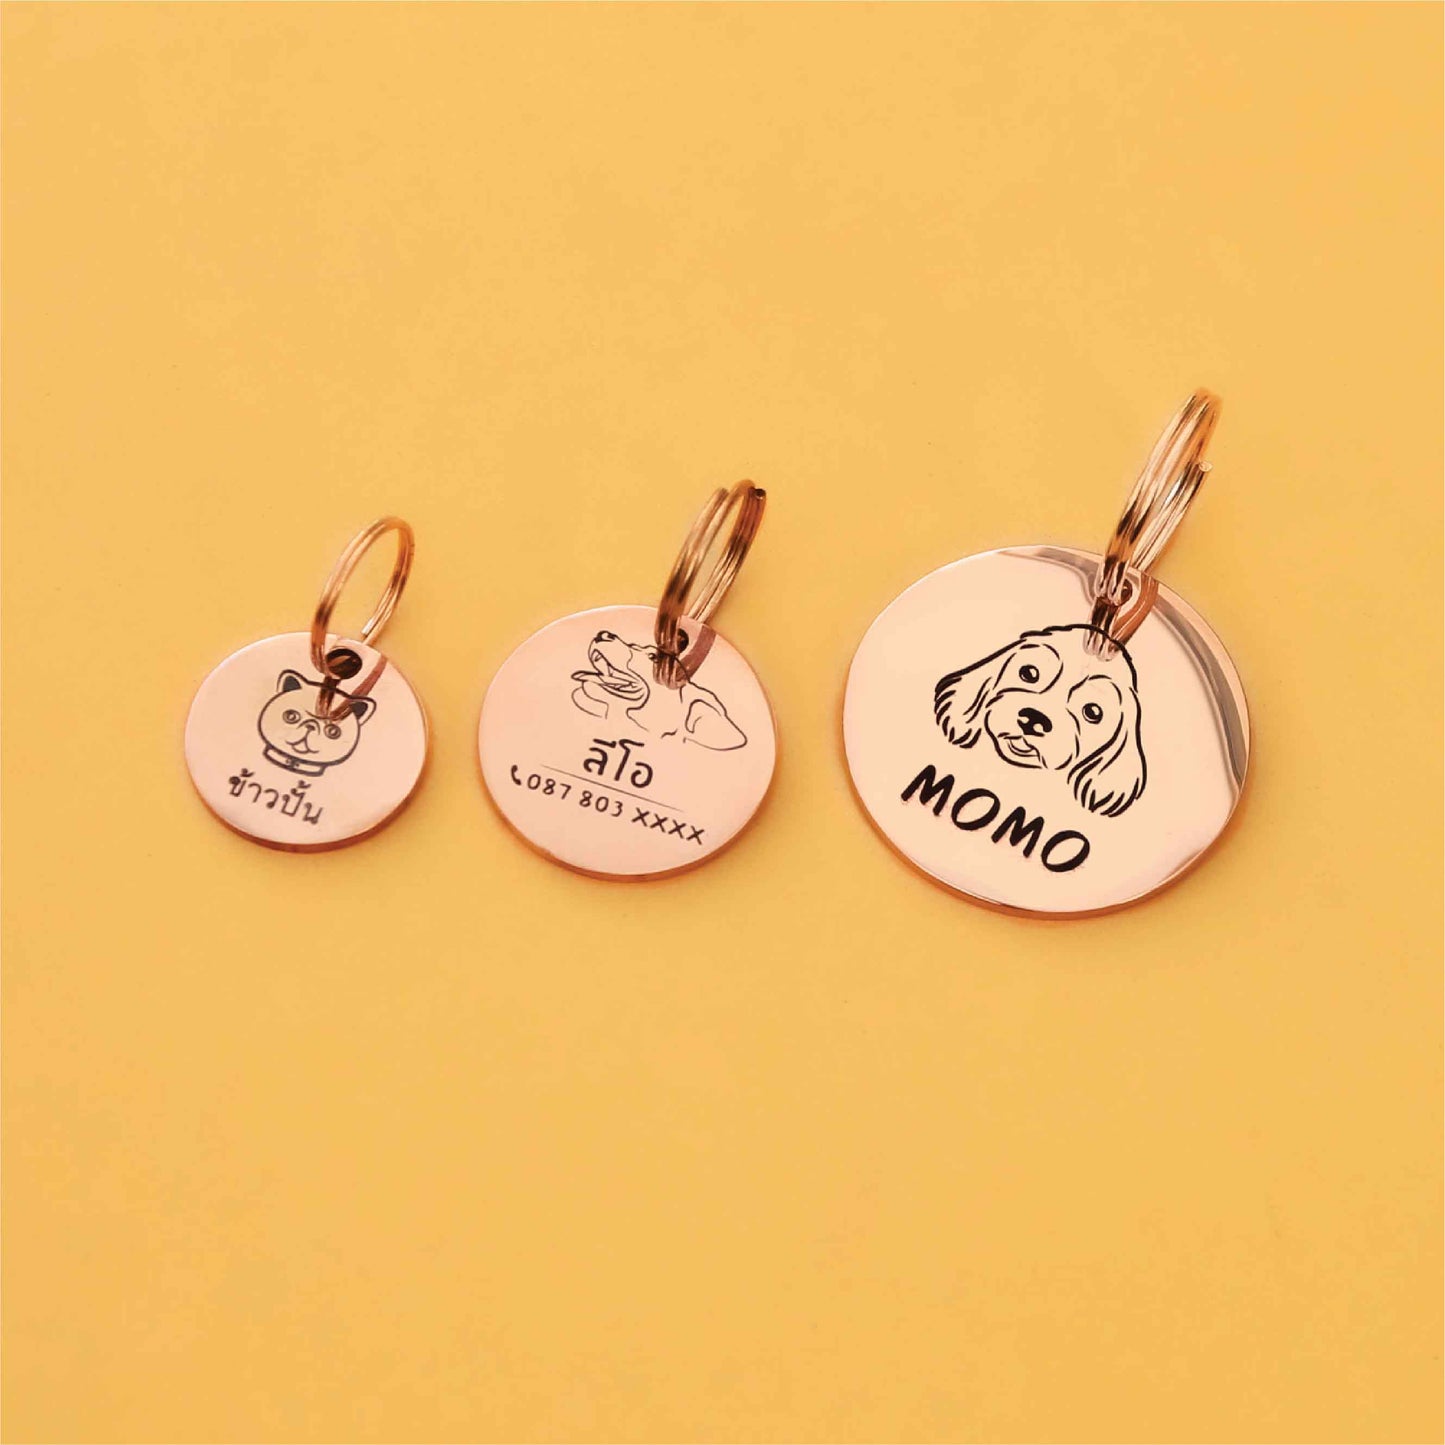 Pet ID tag rose gold stainless steel (THICK) Personalized engraved